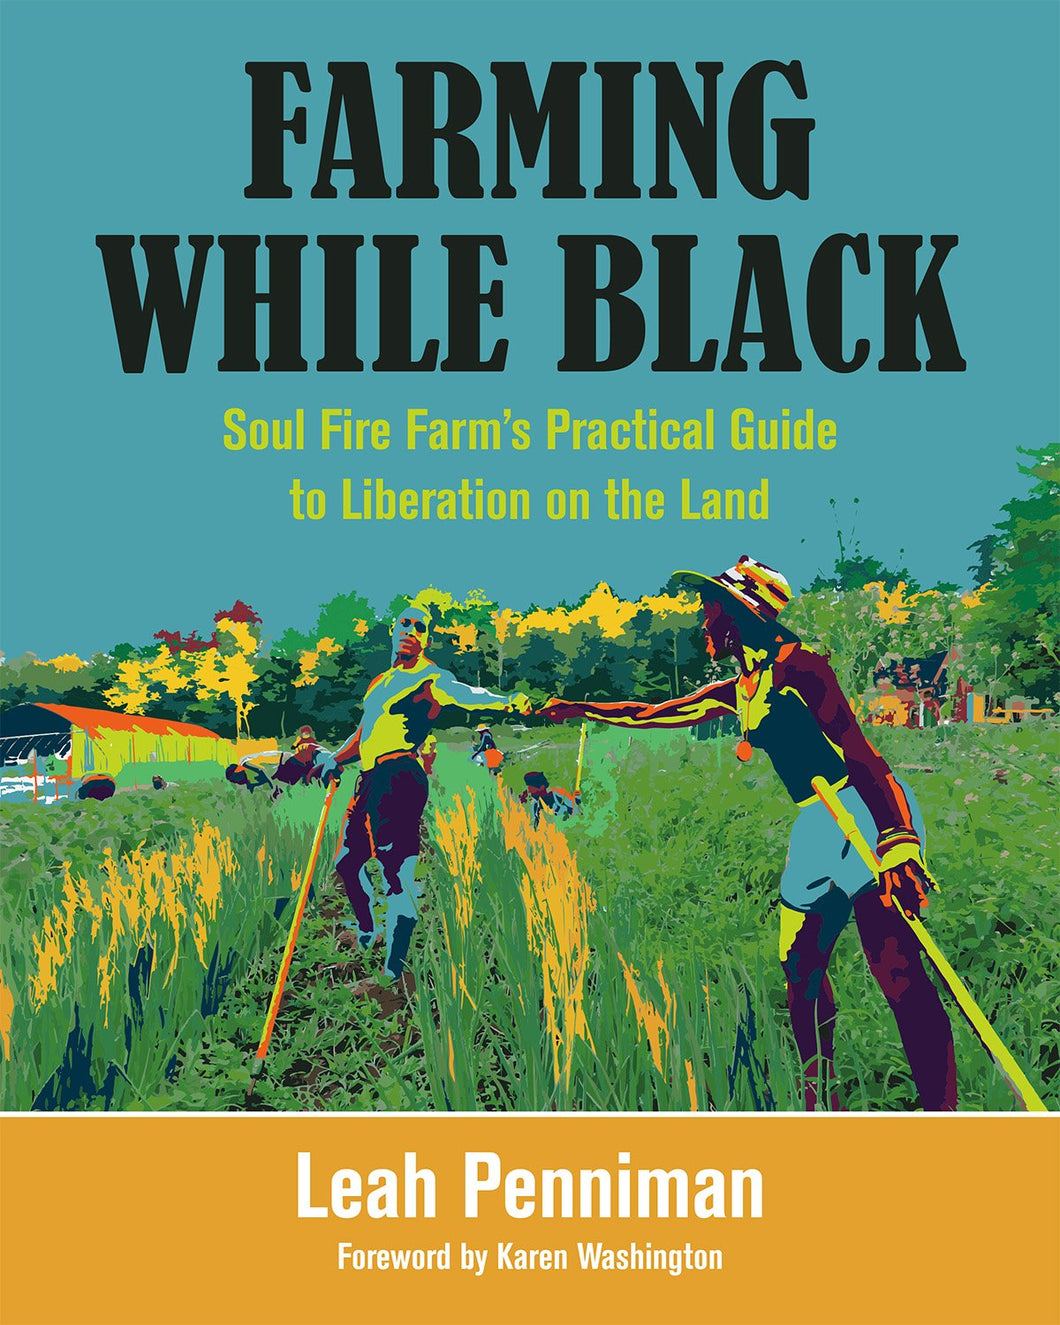 Farming While Black: Soul Fire Farm’s Practical Guide to Liberation on the Land by Leah Penniman